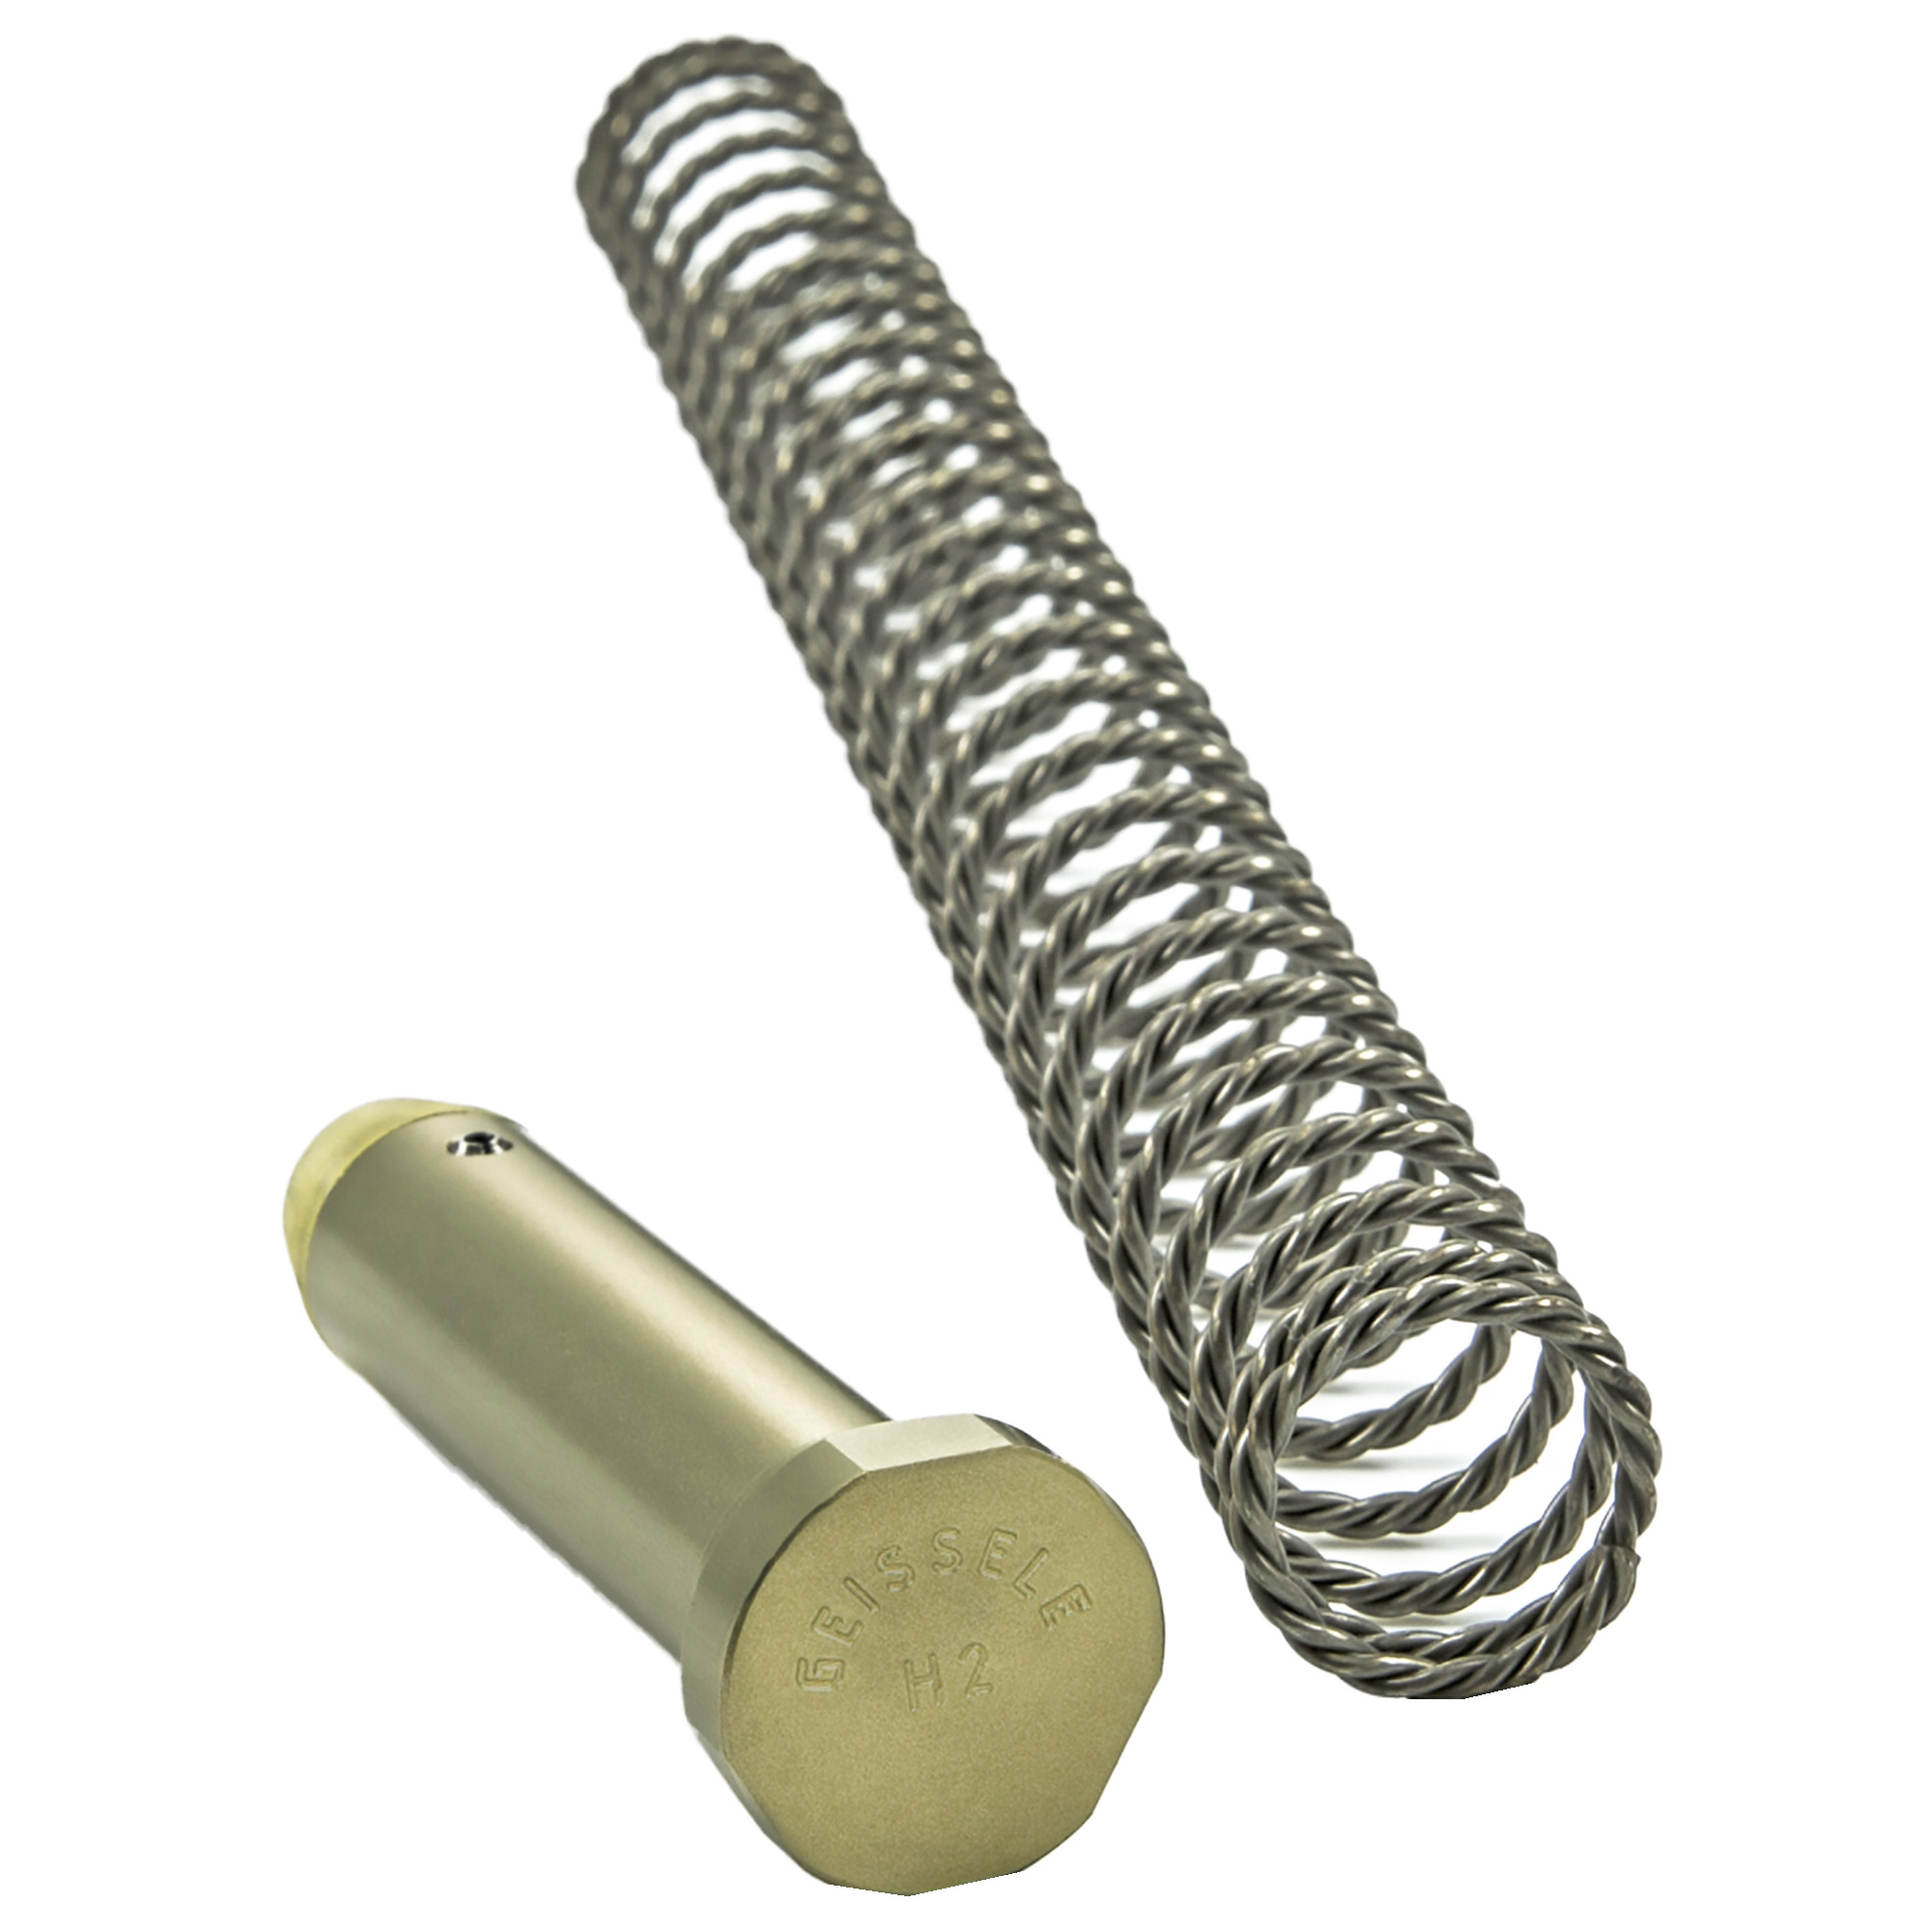 Super Geiselle 42 Buffer with Braided Spring